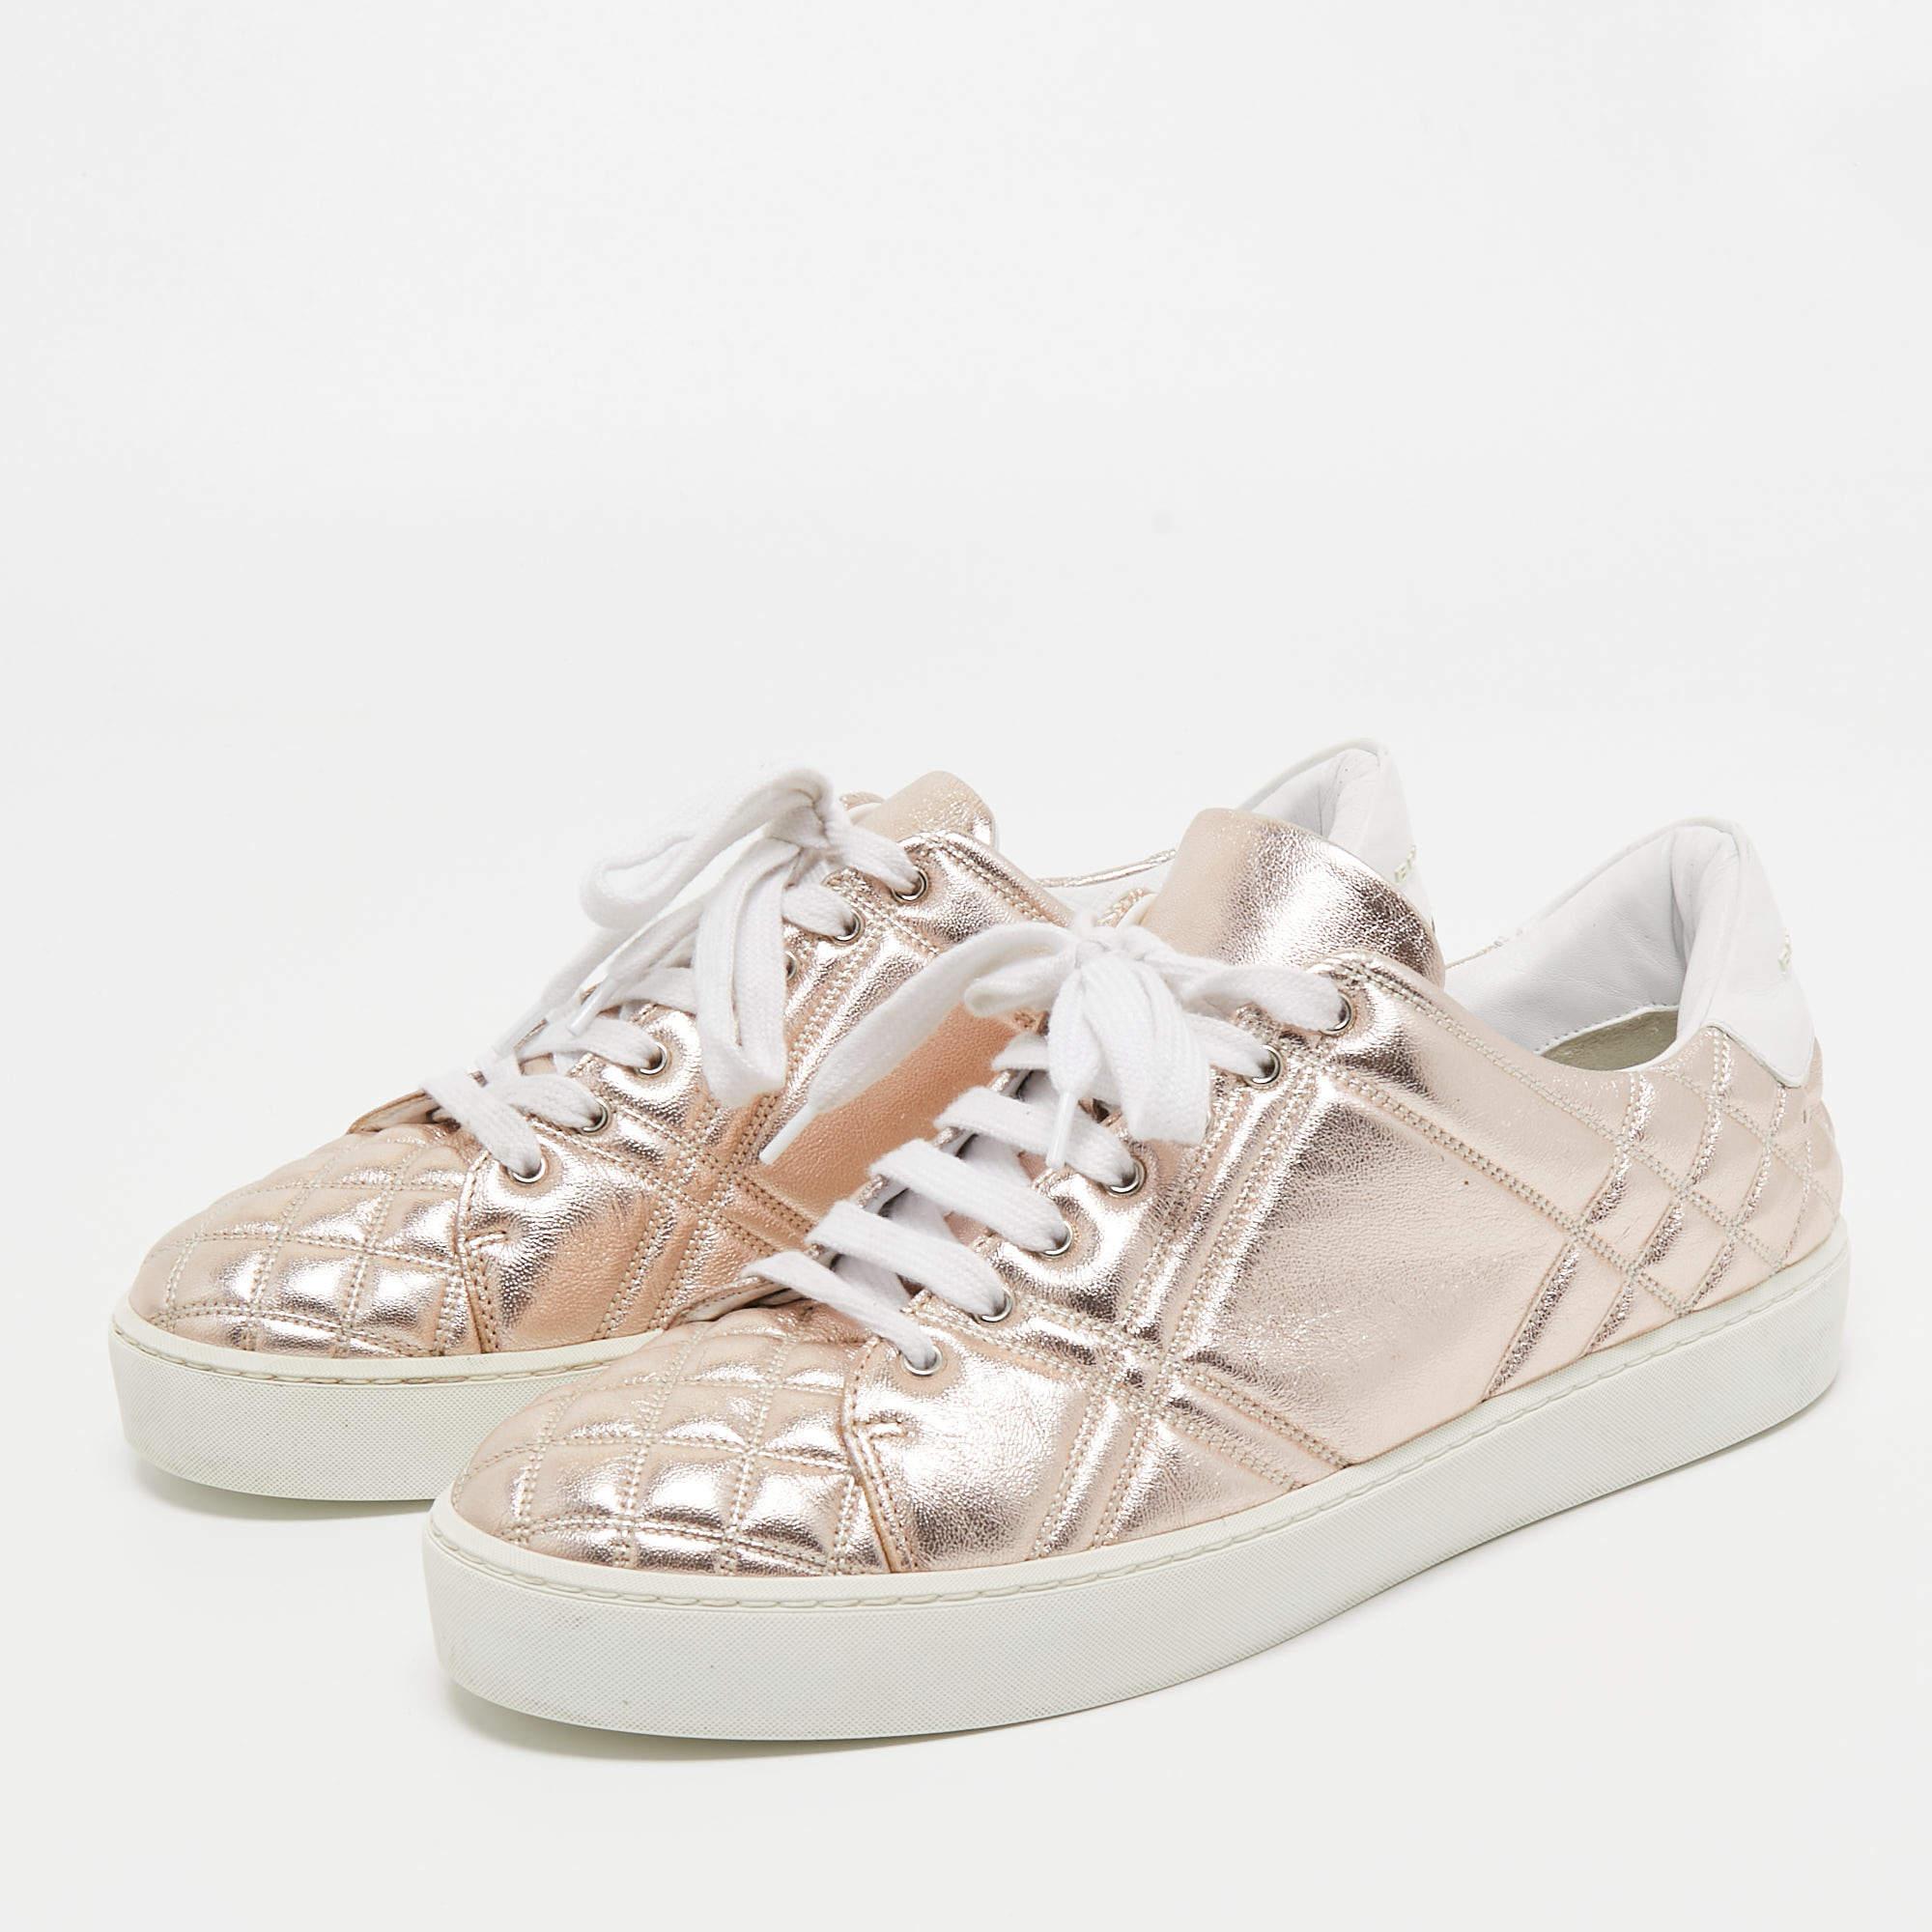 Burberry Metallic Pink Quilted Leather Westford Low Top Sneakers Size 39 For Sale 1